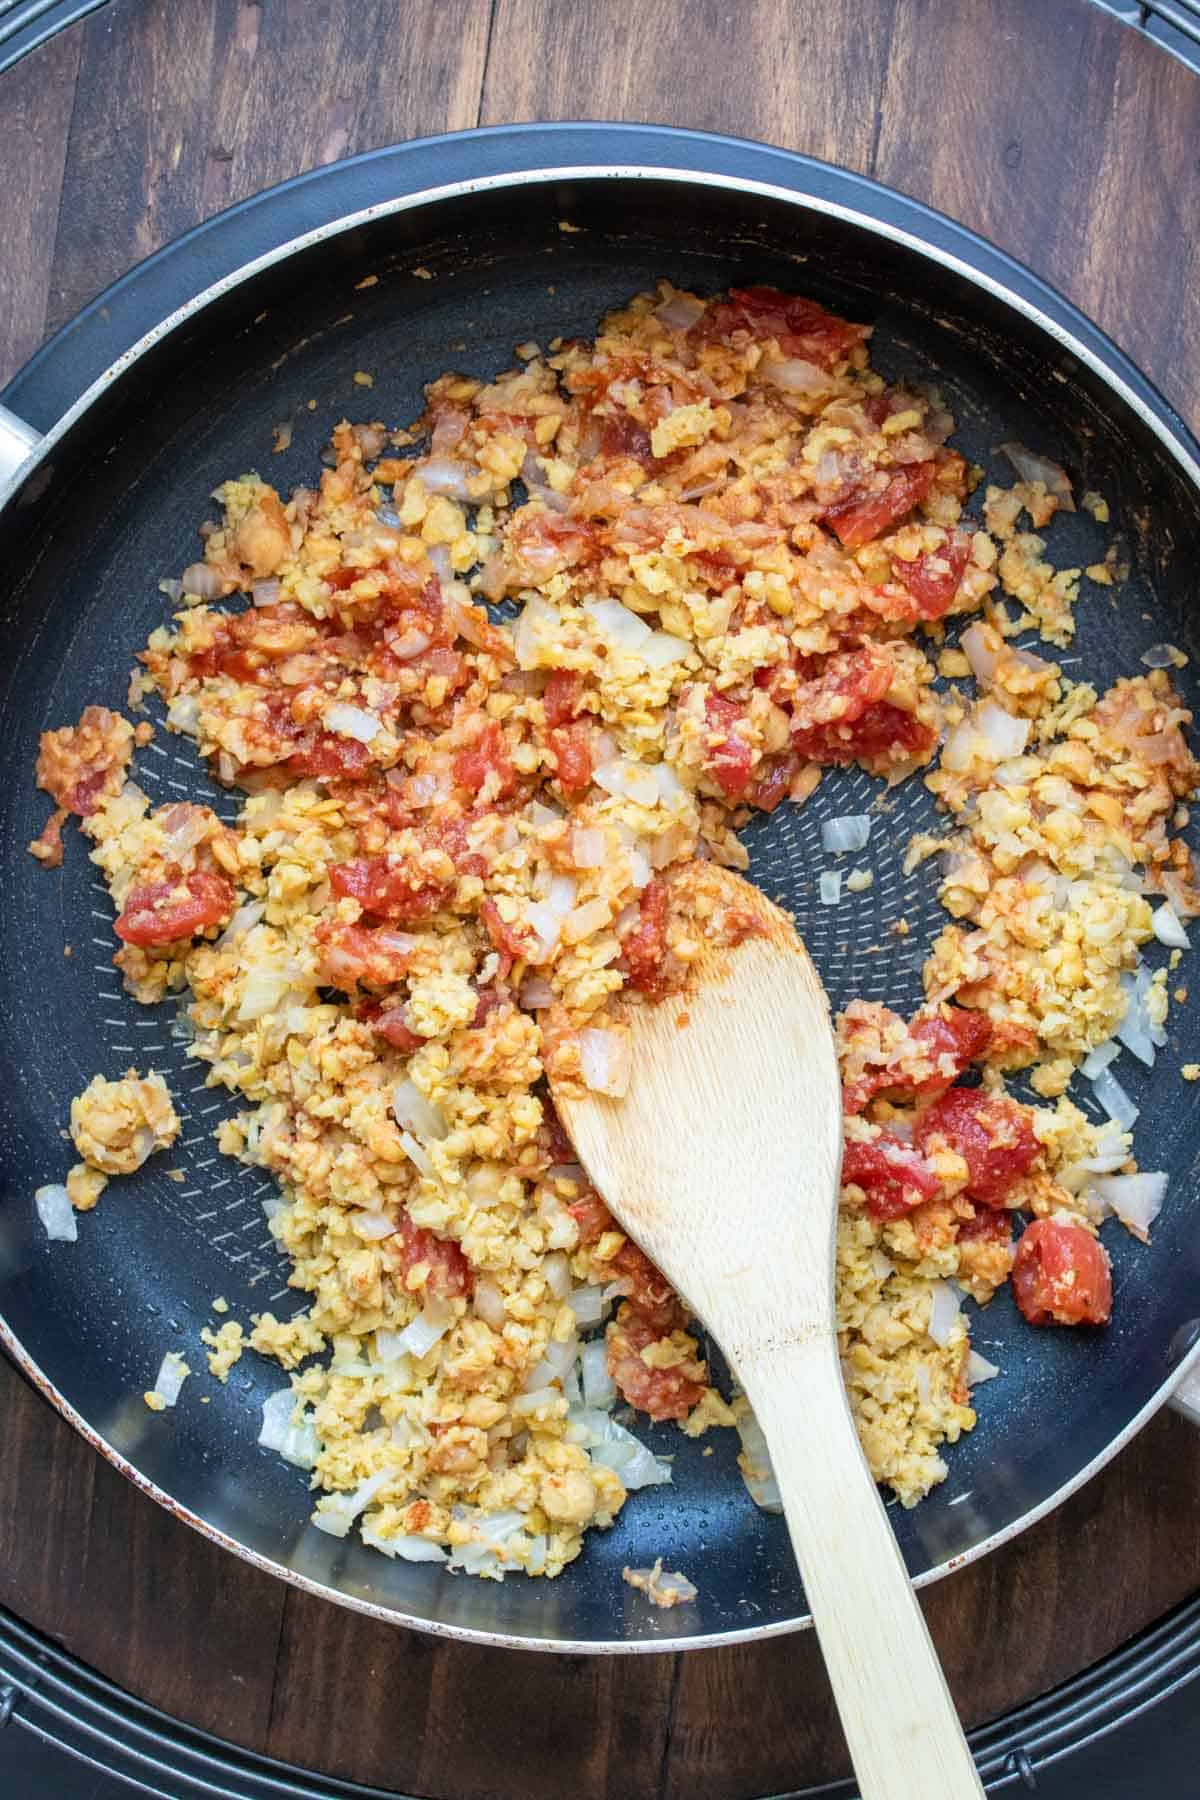 Wooden spoon mixing chopped chickpeas and chopped tomatoes in a pan